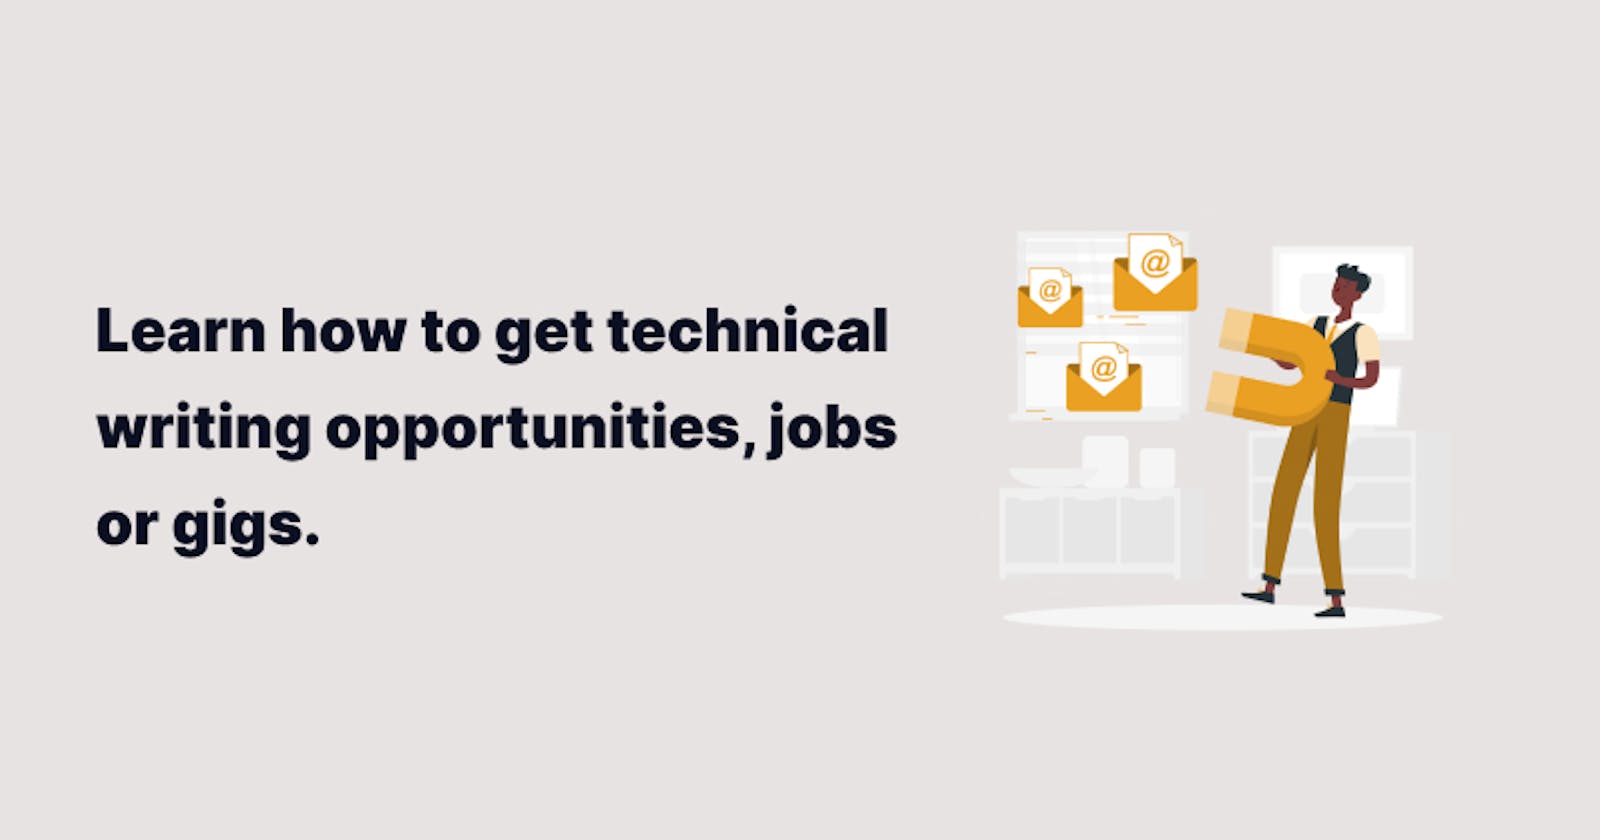 How To Get Technical Writing Jobs, Gigs, or Opportunities